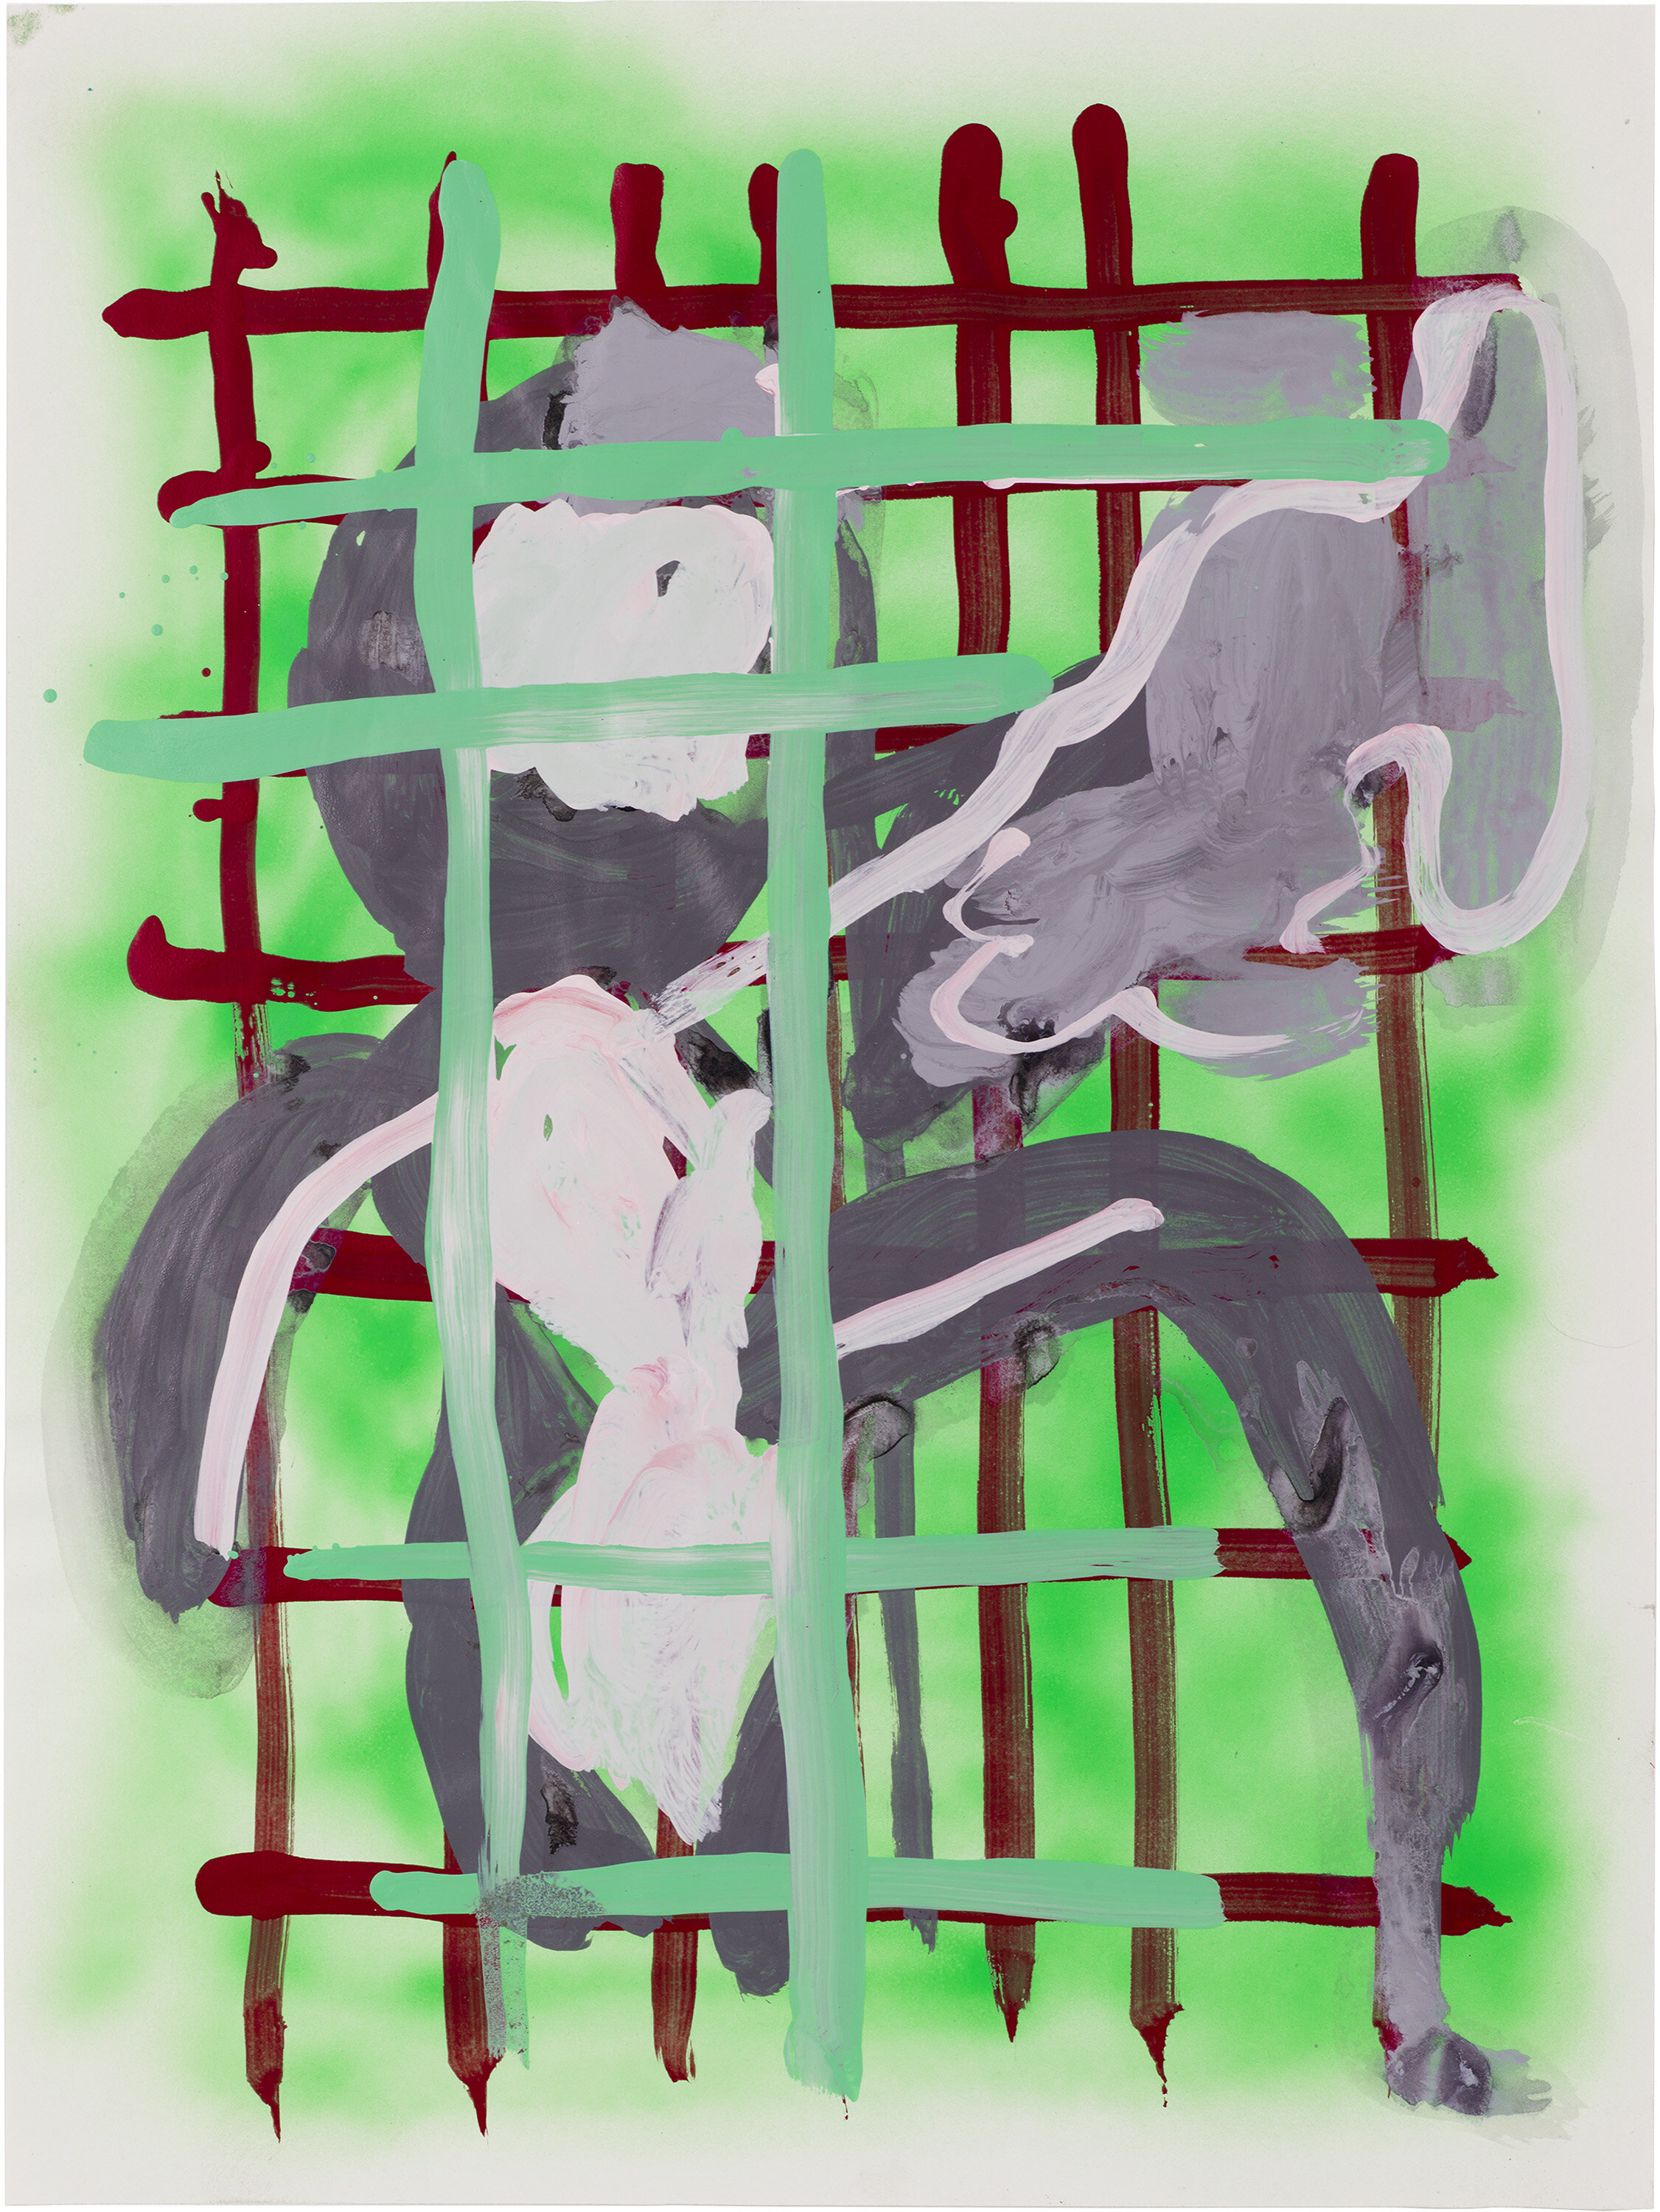  Drew Beattie and Ben Shepard   DBBS-DRW-2015-494   2015  acrylic and spray paint on paper  24 x 18 inches 